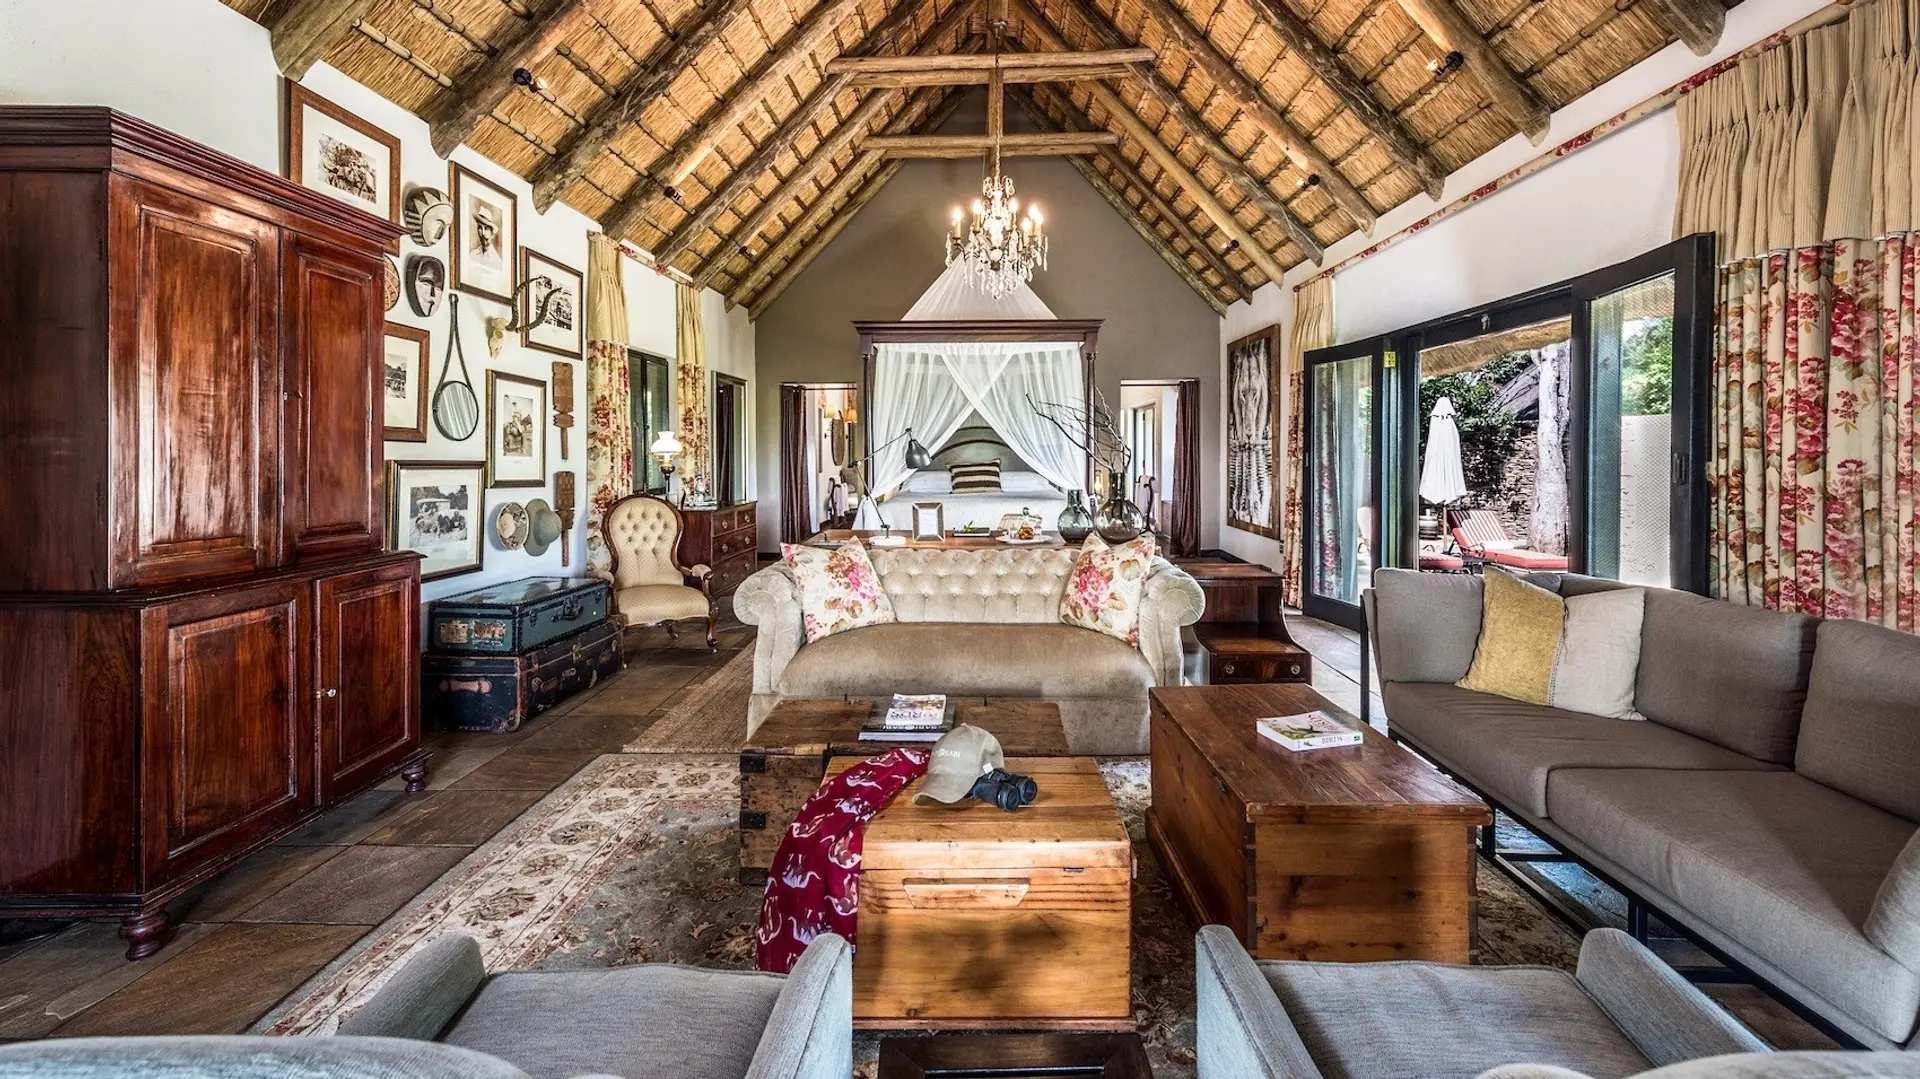 Hotel review Style' - Sabi Sabi Private Game Reserve  - 2